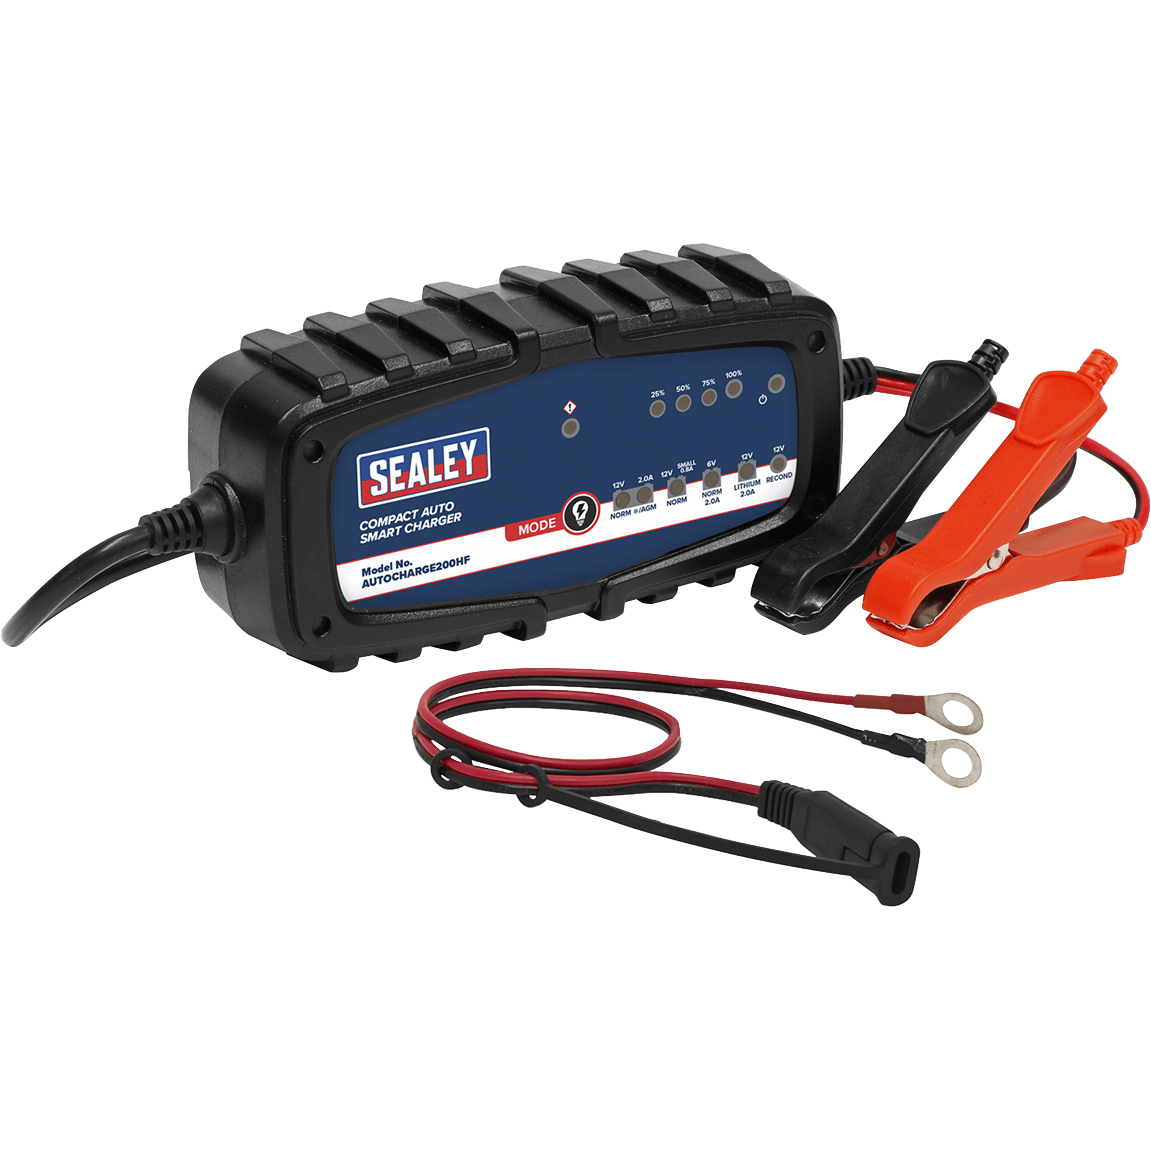 Sealey 200HF Compact Auto Smart 2amp Battery Charger 6v or 12v